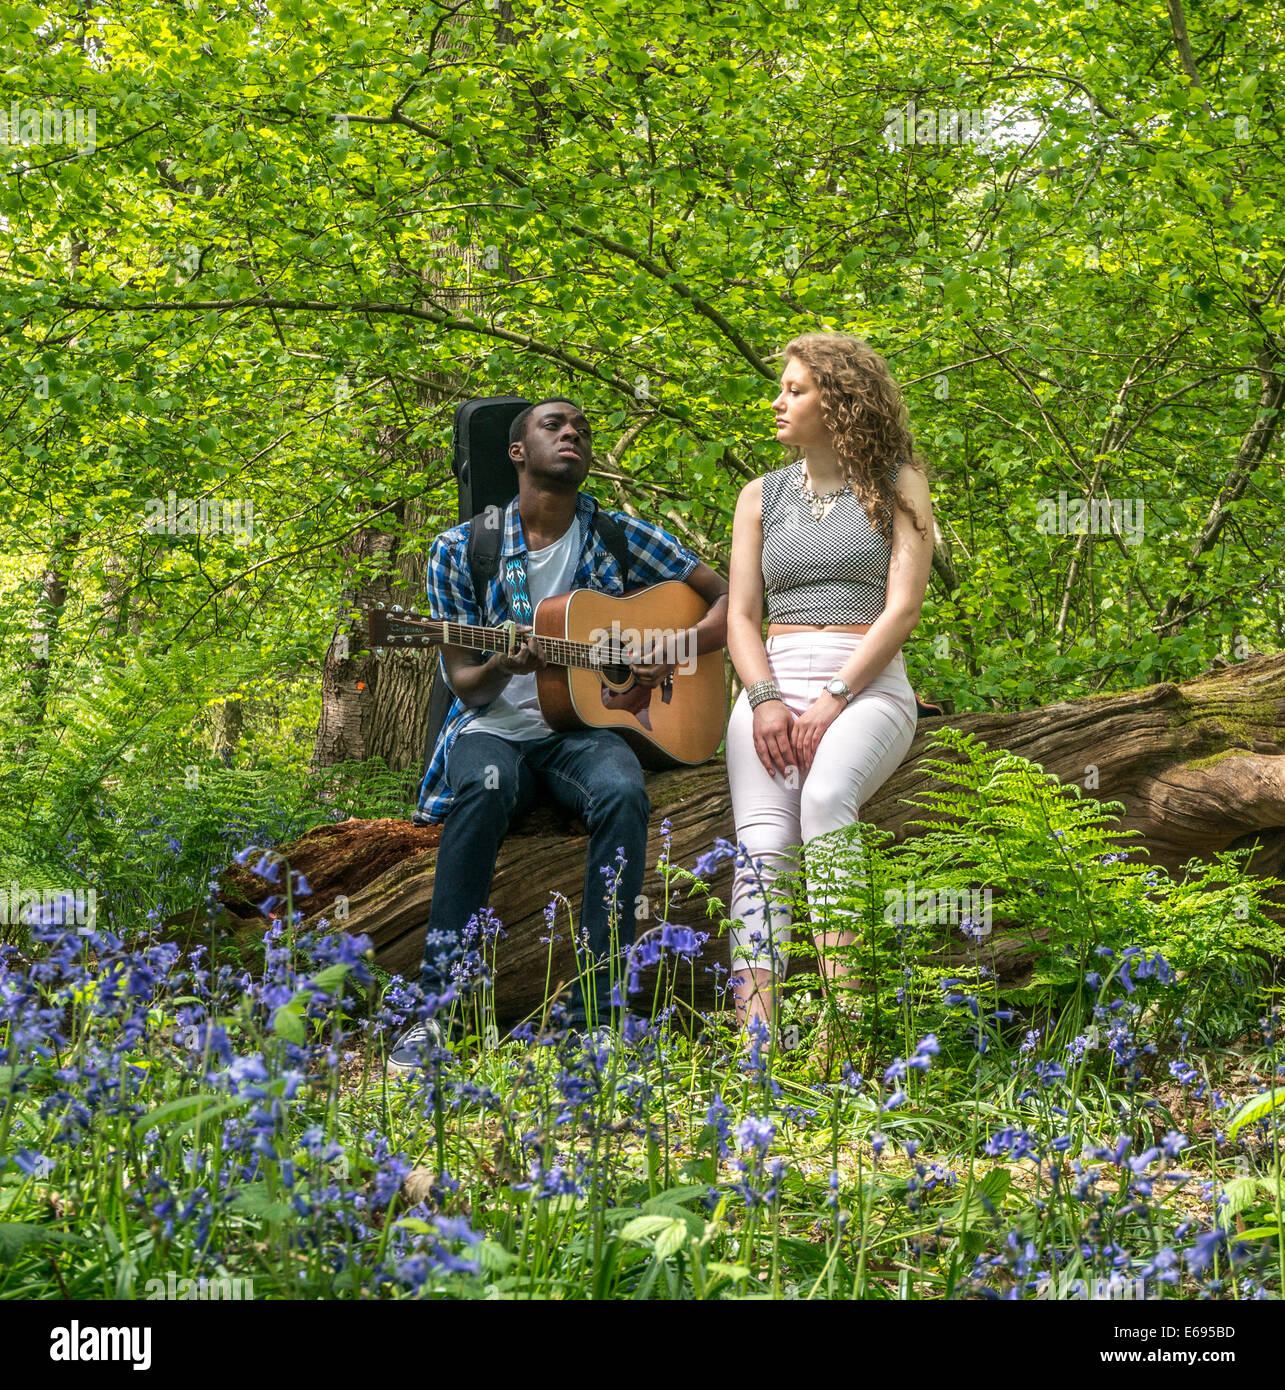 Interracial couple. A pretty teenage girl singing with her handsome boyfriend playing guitar. Banstead Woods, Banstead, Surrey, England, UK. Stock Photo